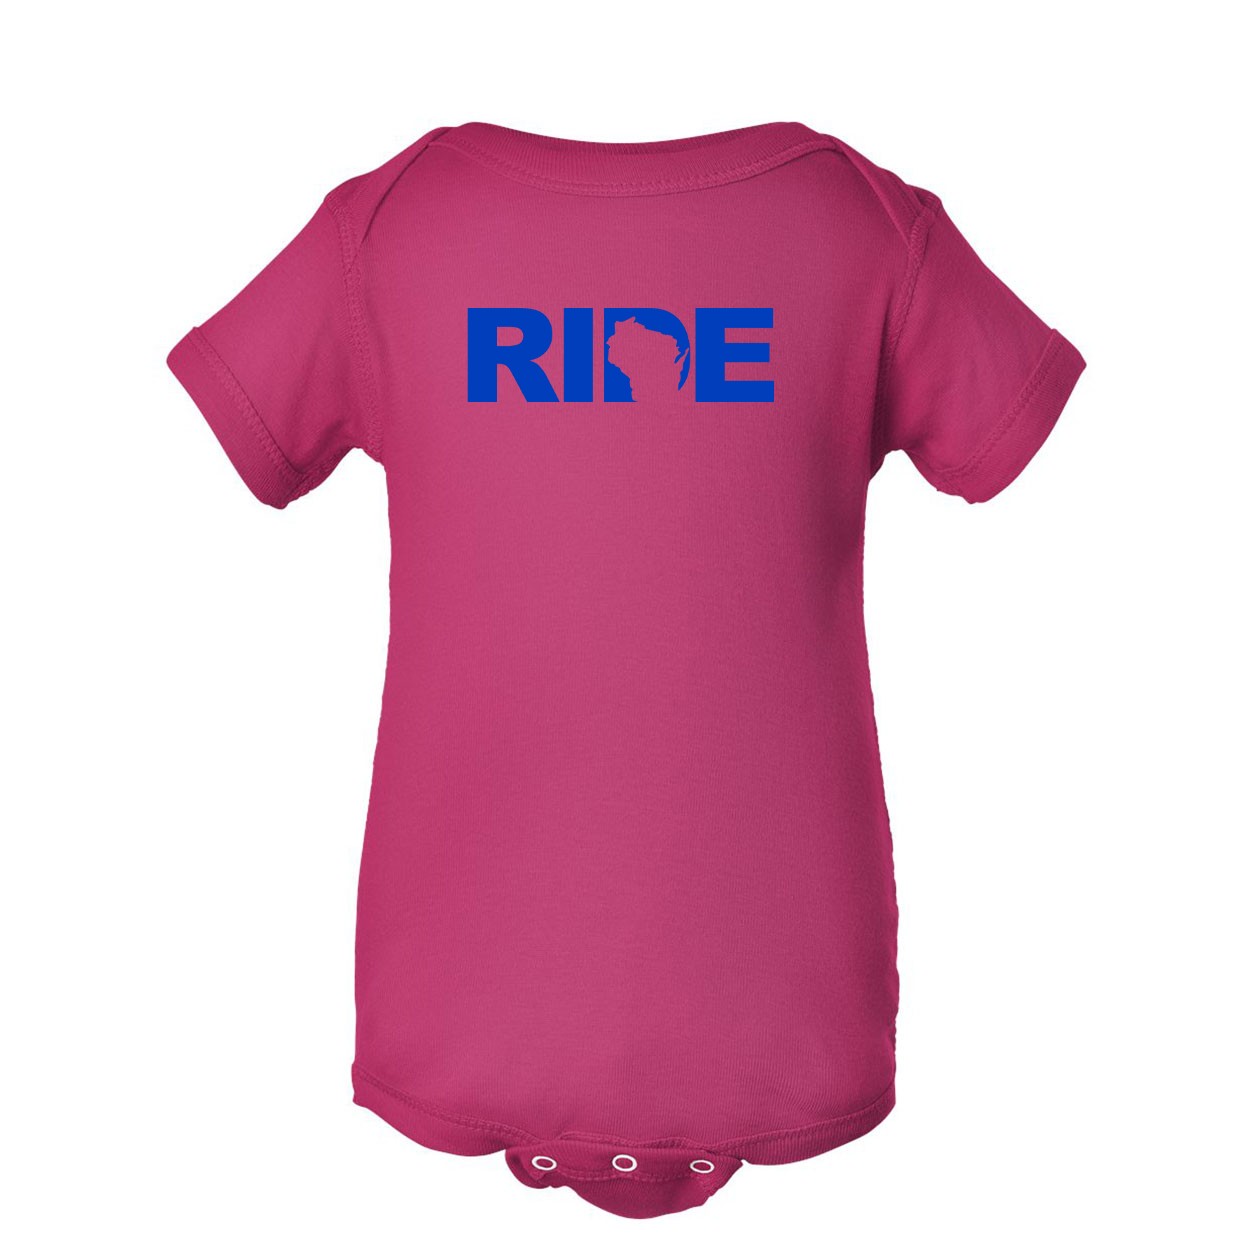 Ride Wisconsin Classic Infant Baby Onesie Hot Pink (Blue Logo)